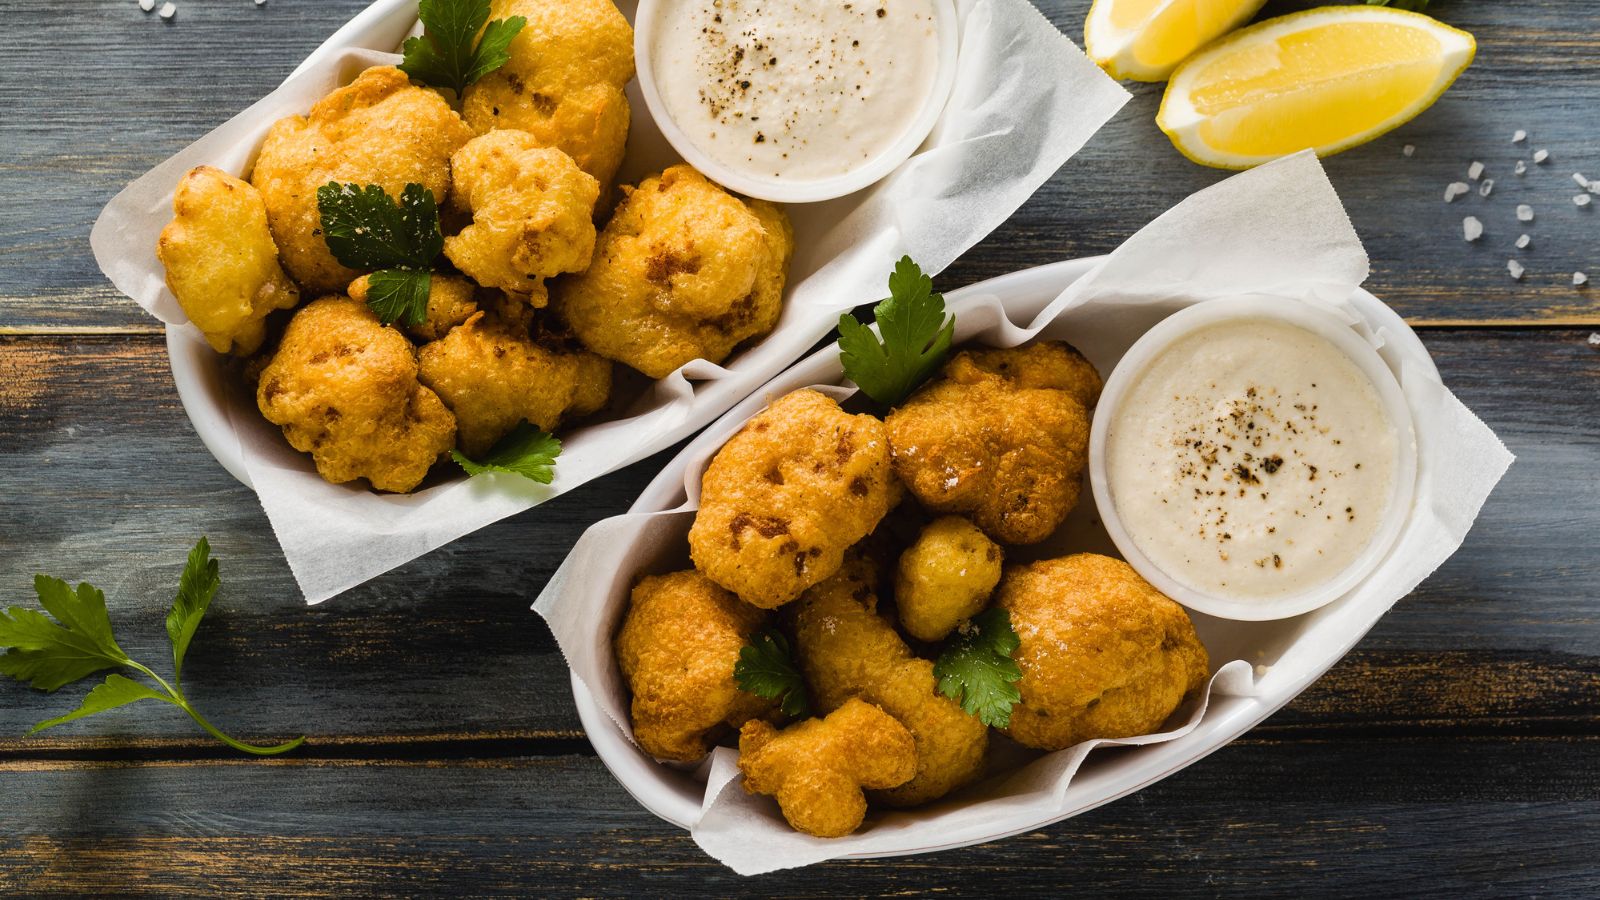 20 Irresistible Cauliflower Dishes That Keep You Coming Back